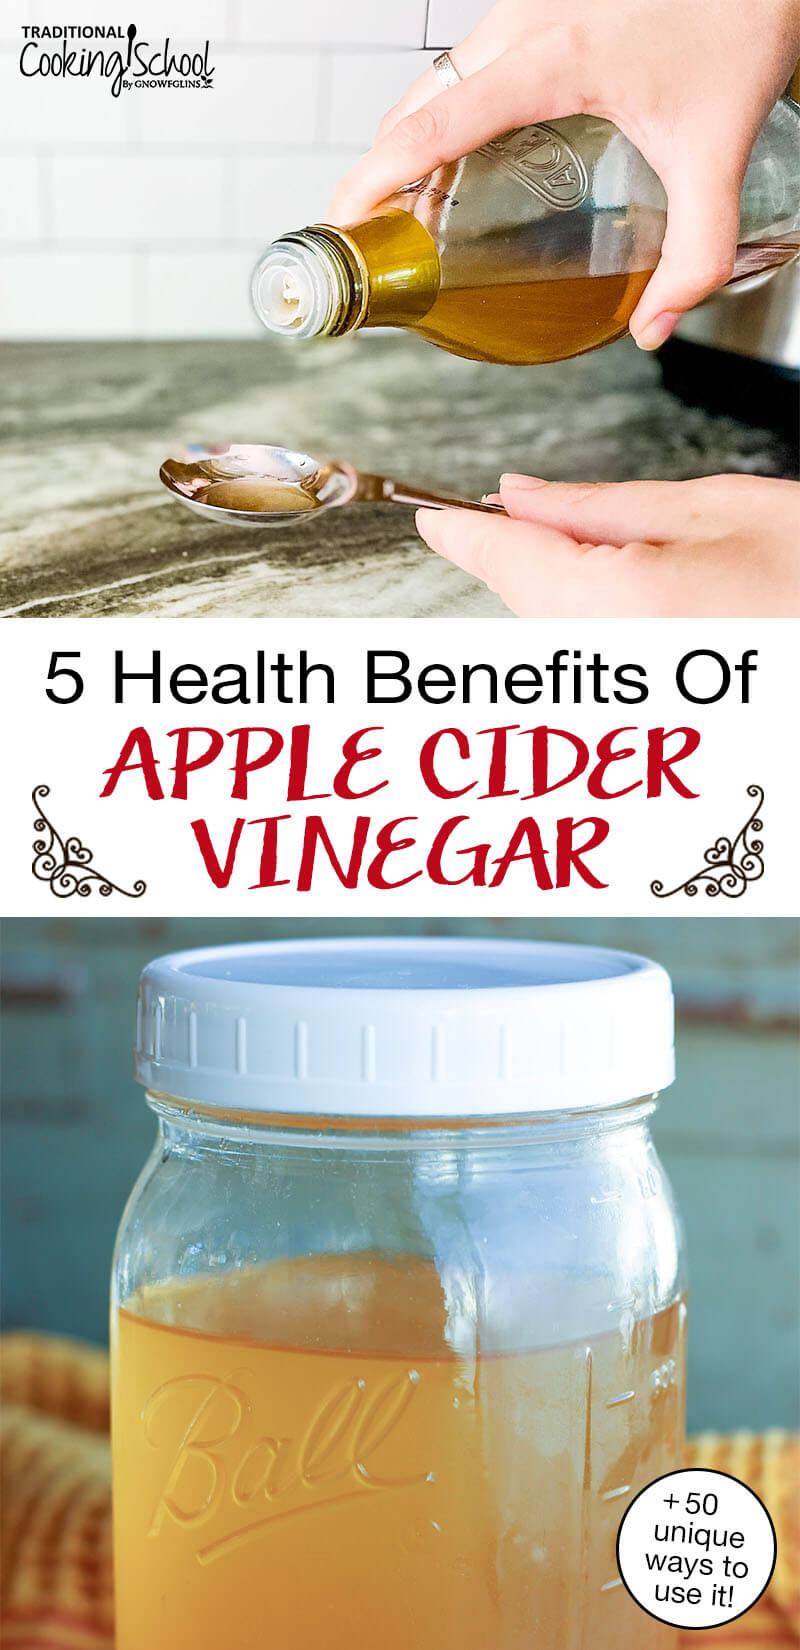 photo collage of apple cider vinegar, including a woman pouring it into a measuring spoon, with text overlay: "5 Health Benefits Of Apple Cider Vinegar (+50 unique ways to use it!)"